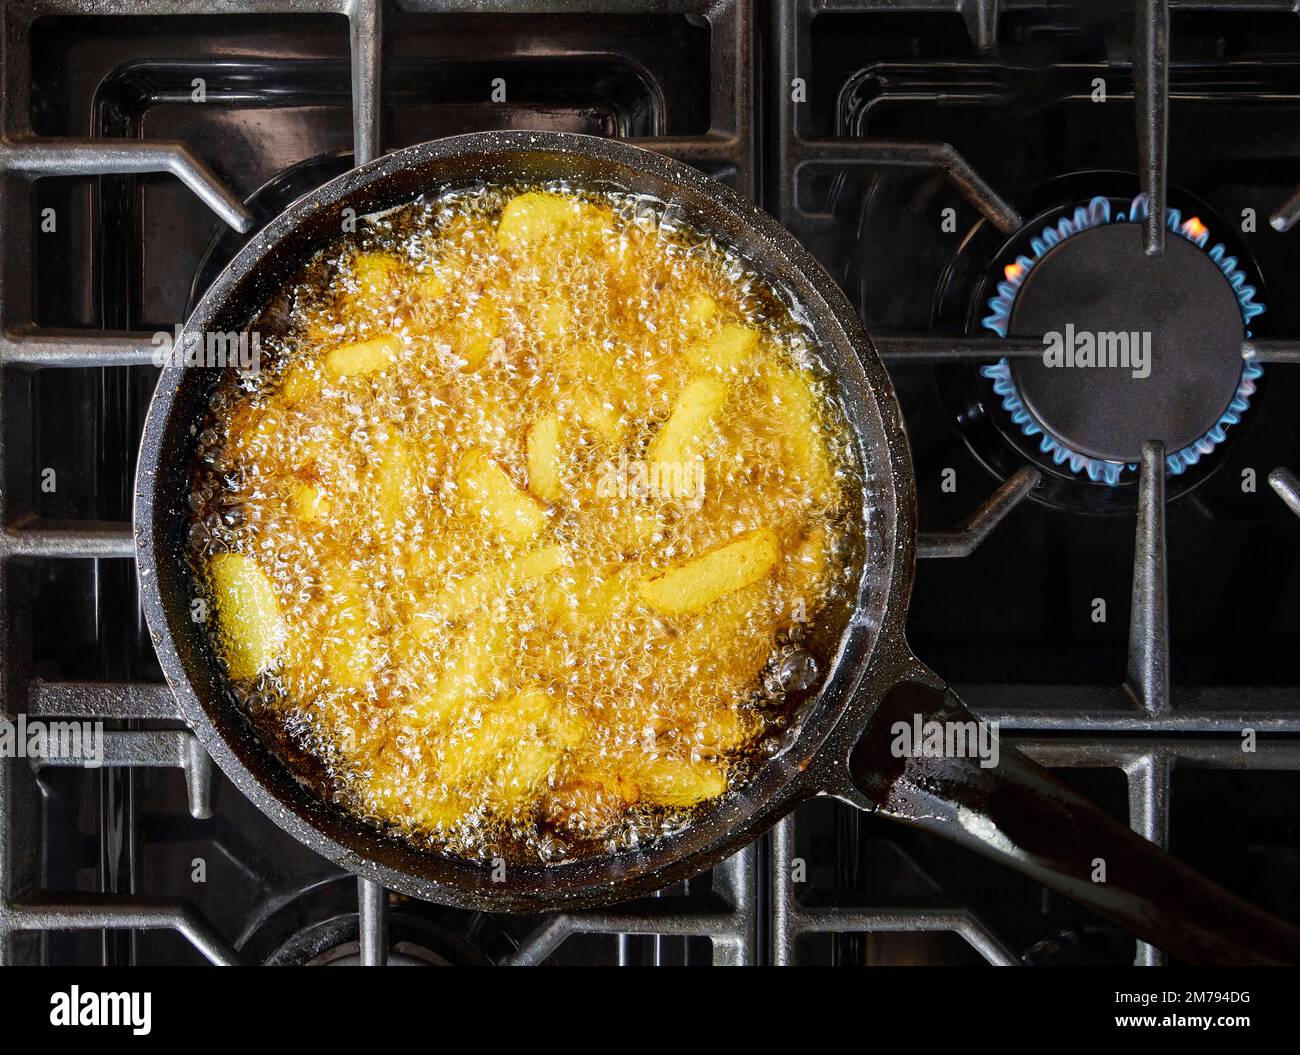 French fries frying in a pan. Fries are deep-fried stick potatoes. Stock Photo